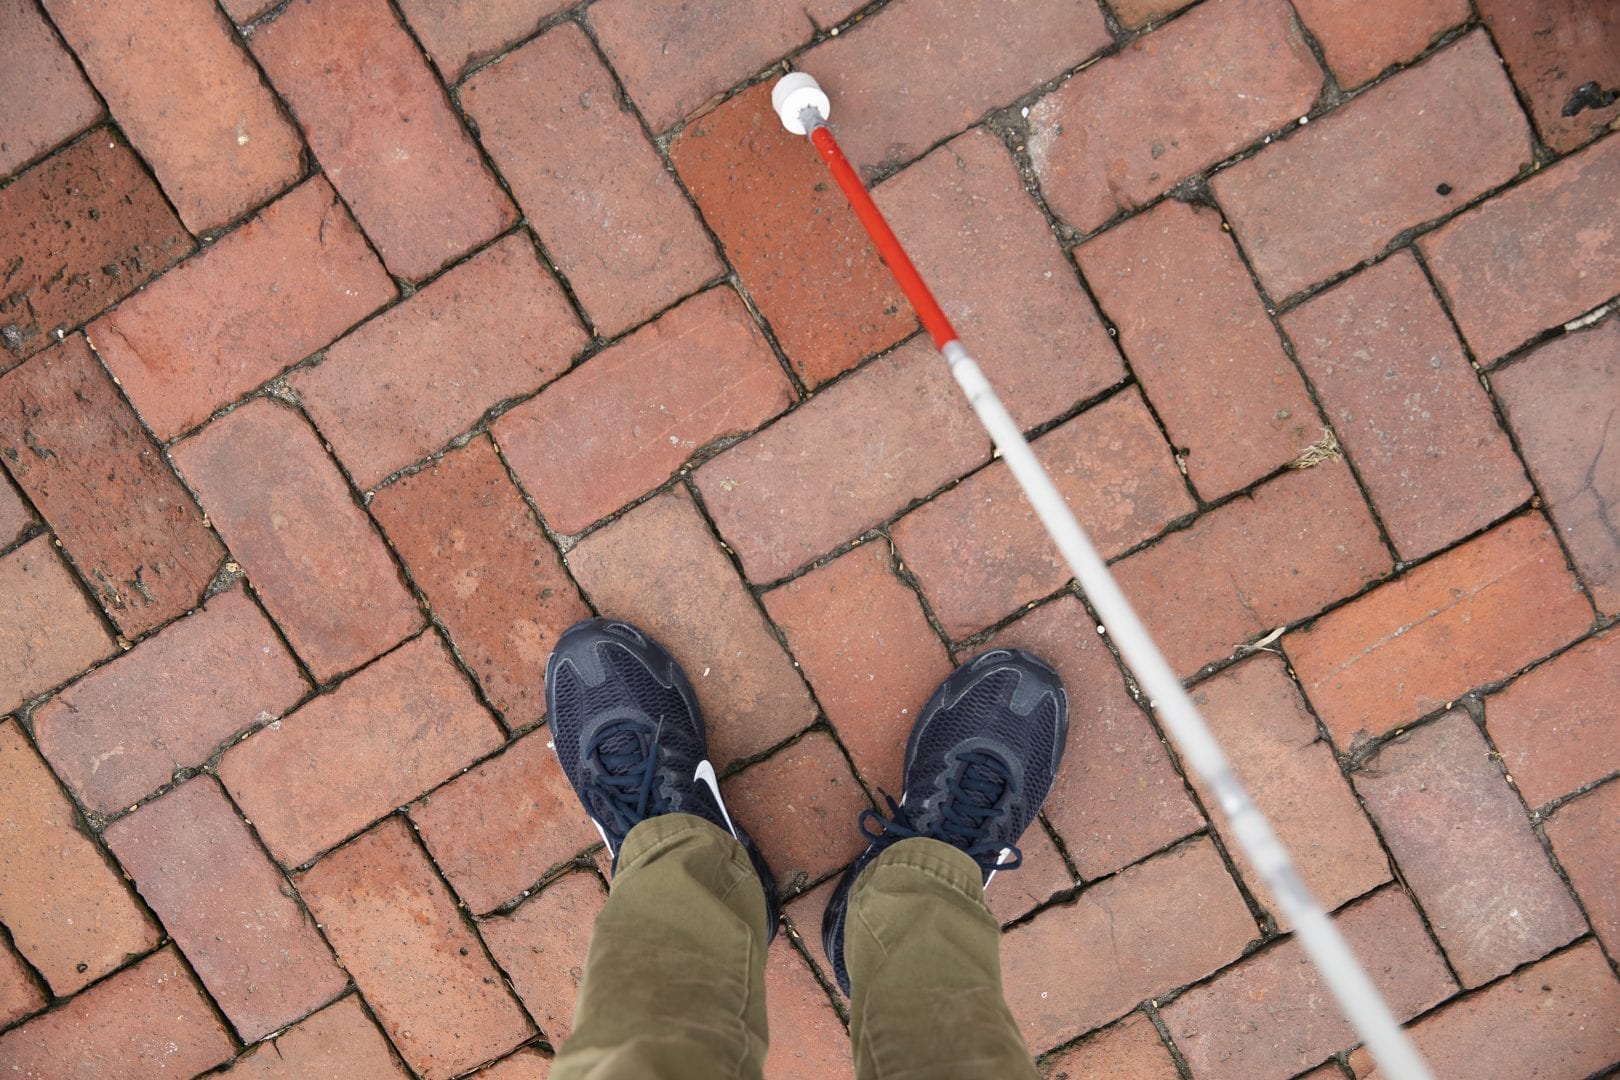 First person view looking down at feet and cane while standing on a brick walkway.